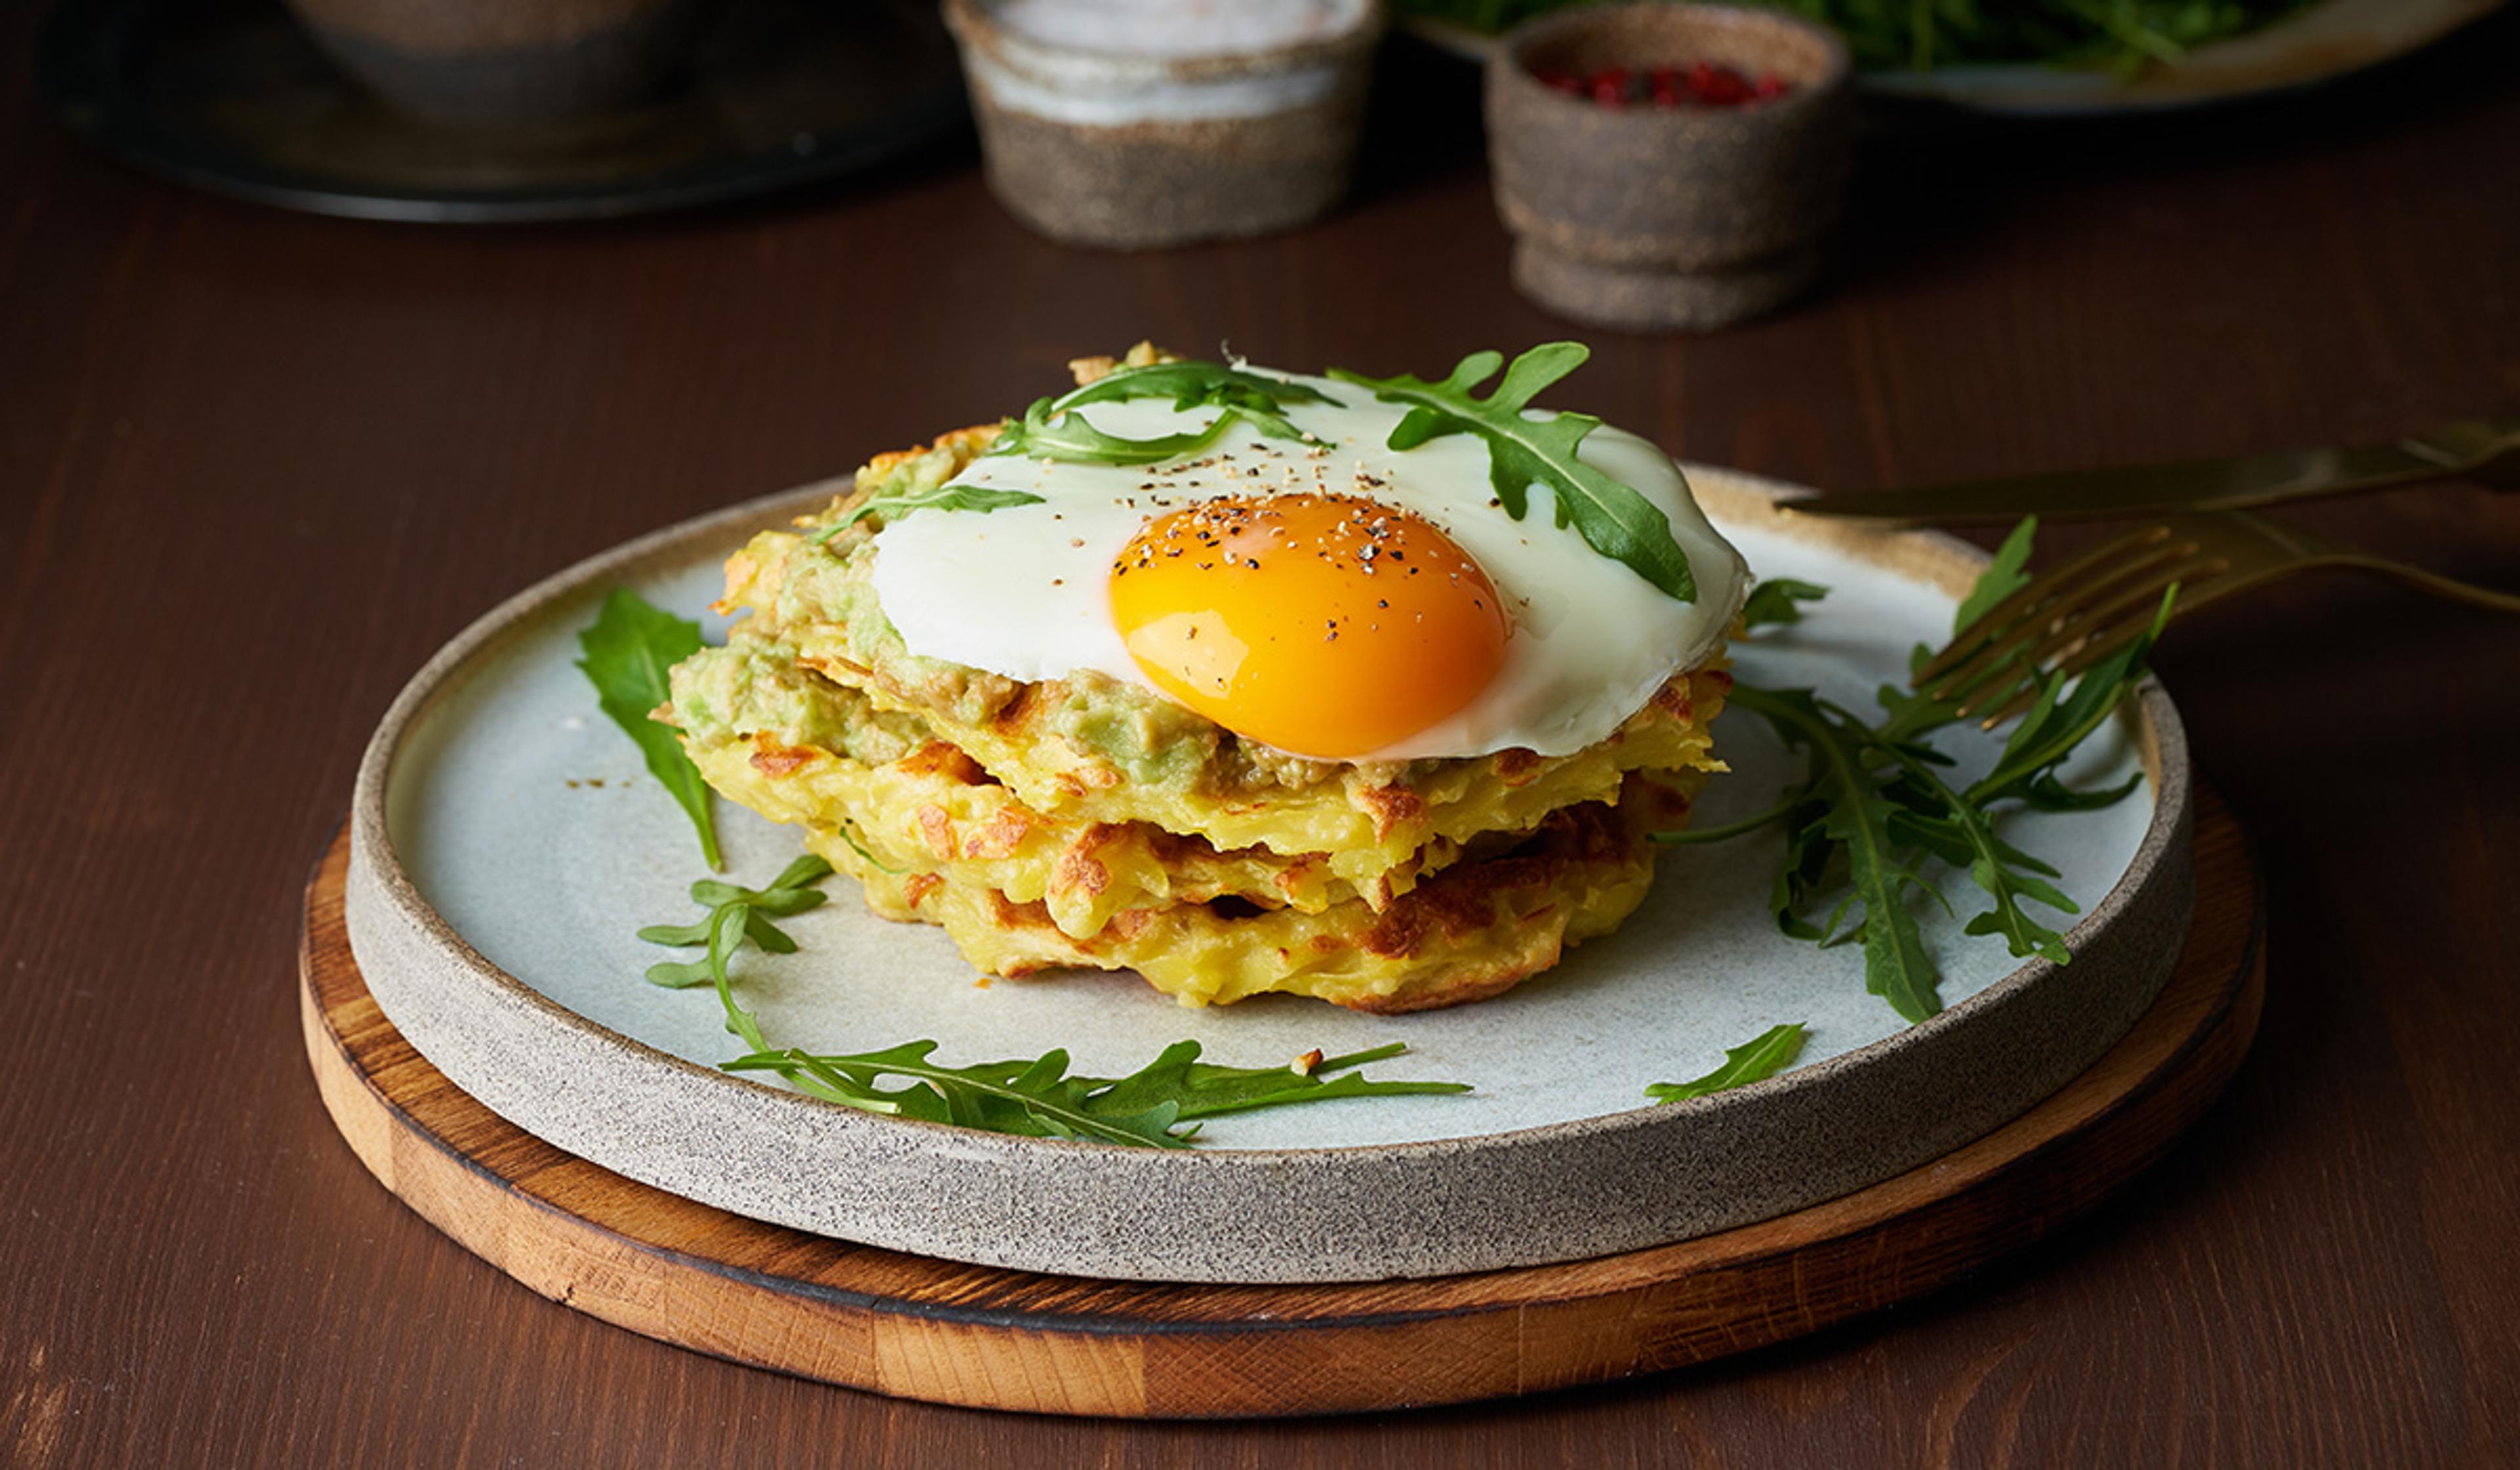 Savory waffle using leftover stuffing and topped with a fried egg.